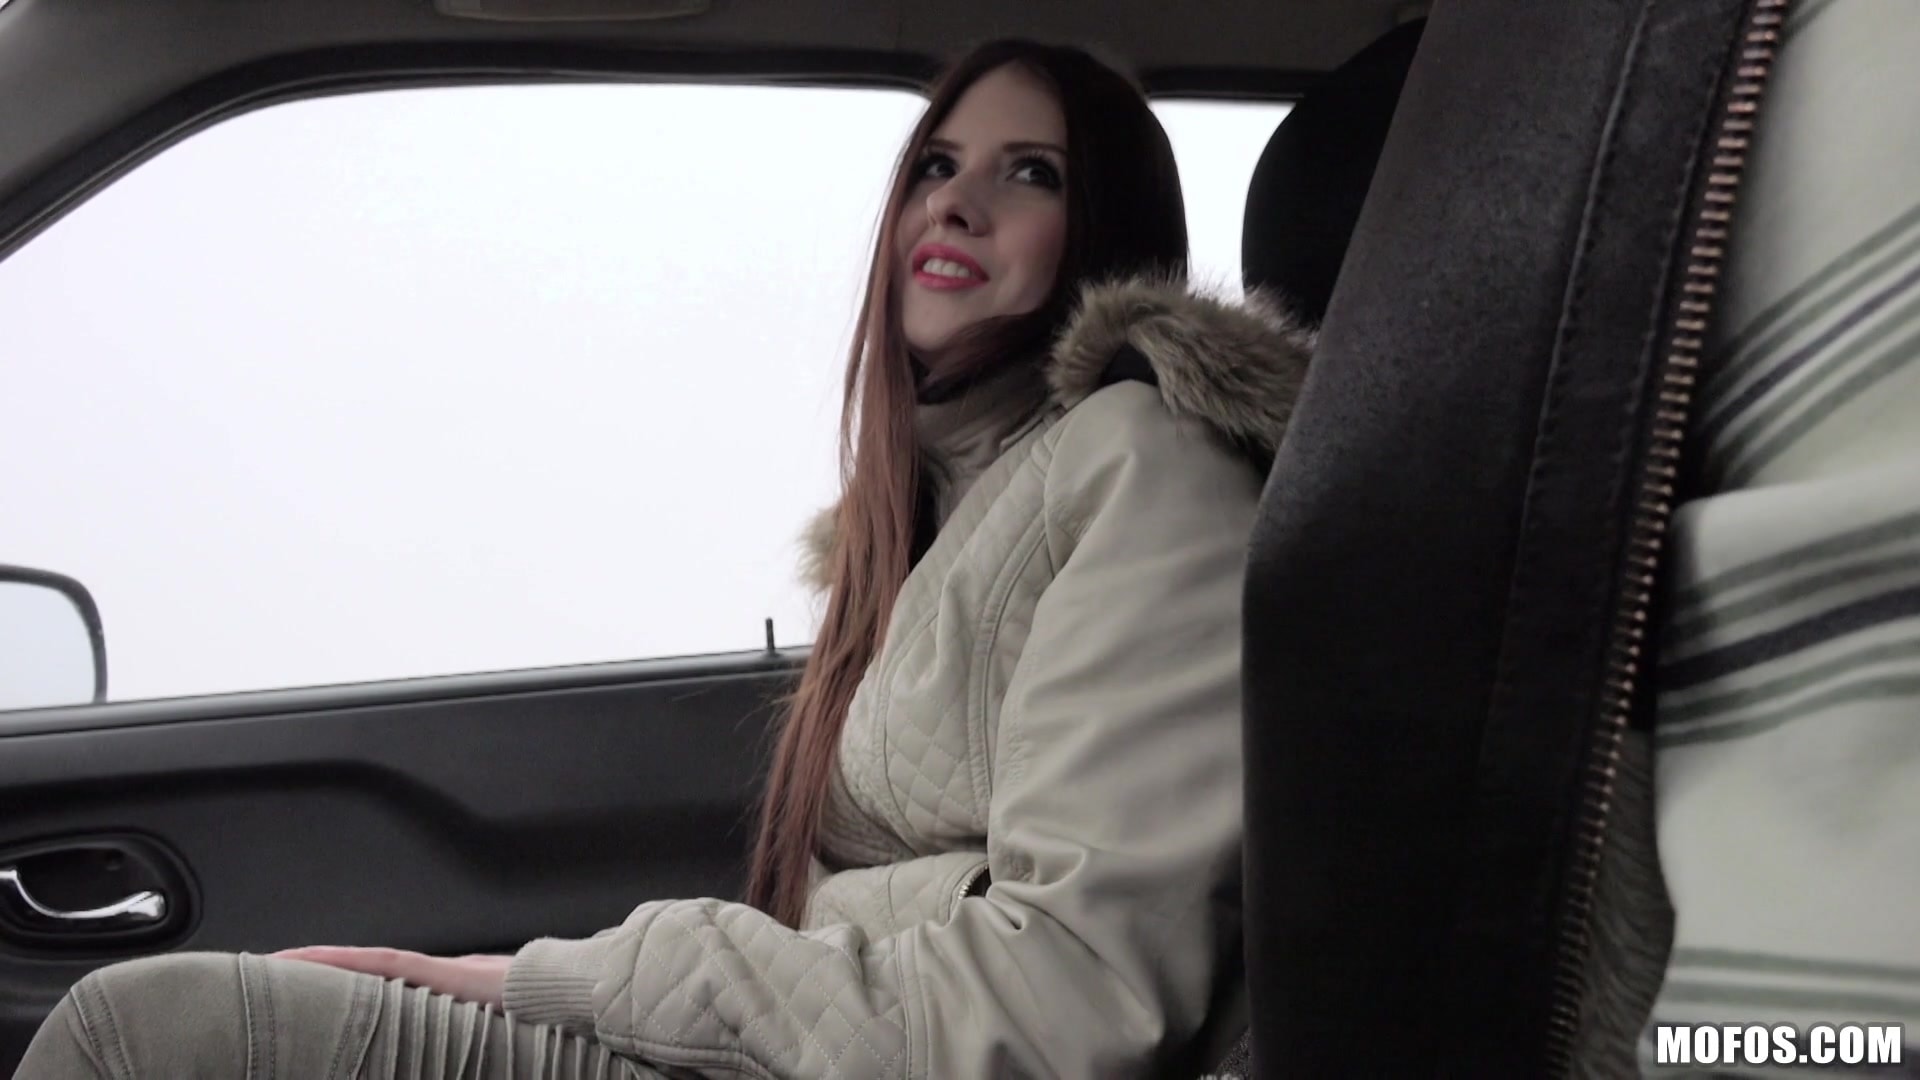 Mofos 'Hitchhiker Gives Blowjob In Car' starring Rebecca Volpetti (Photo 80)